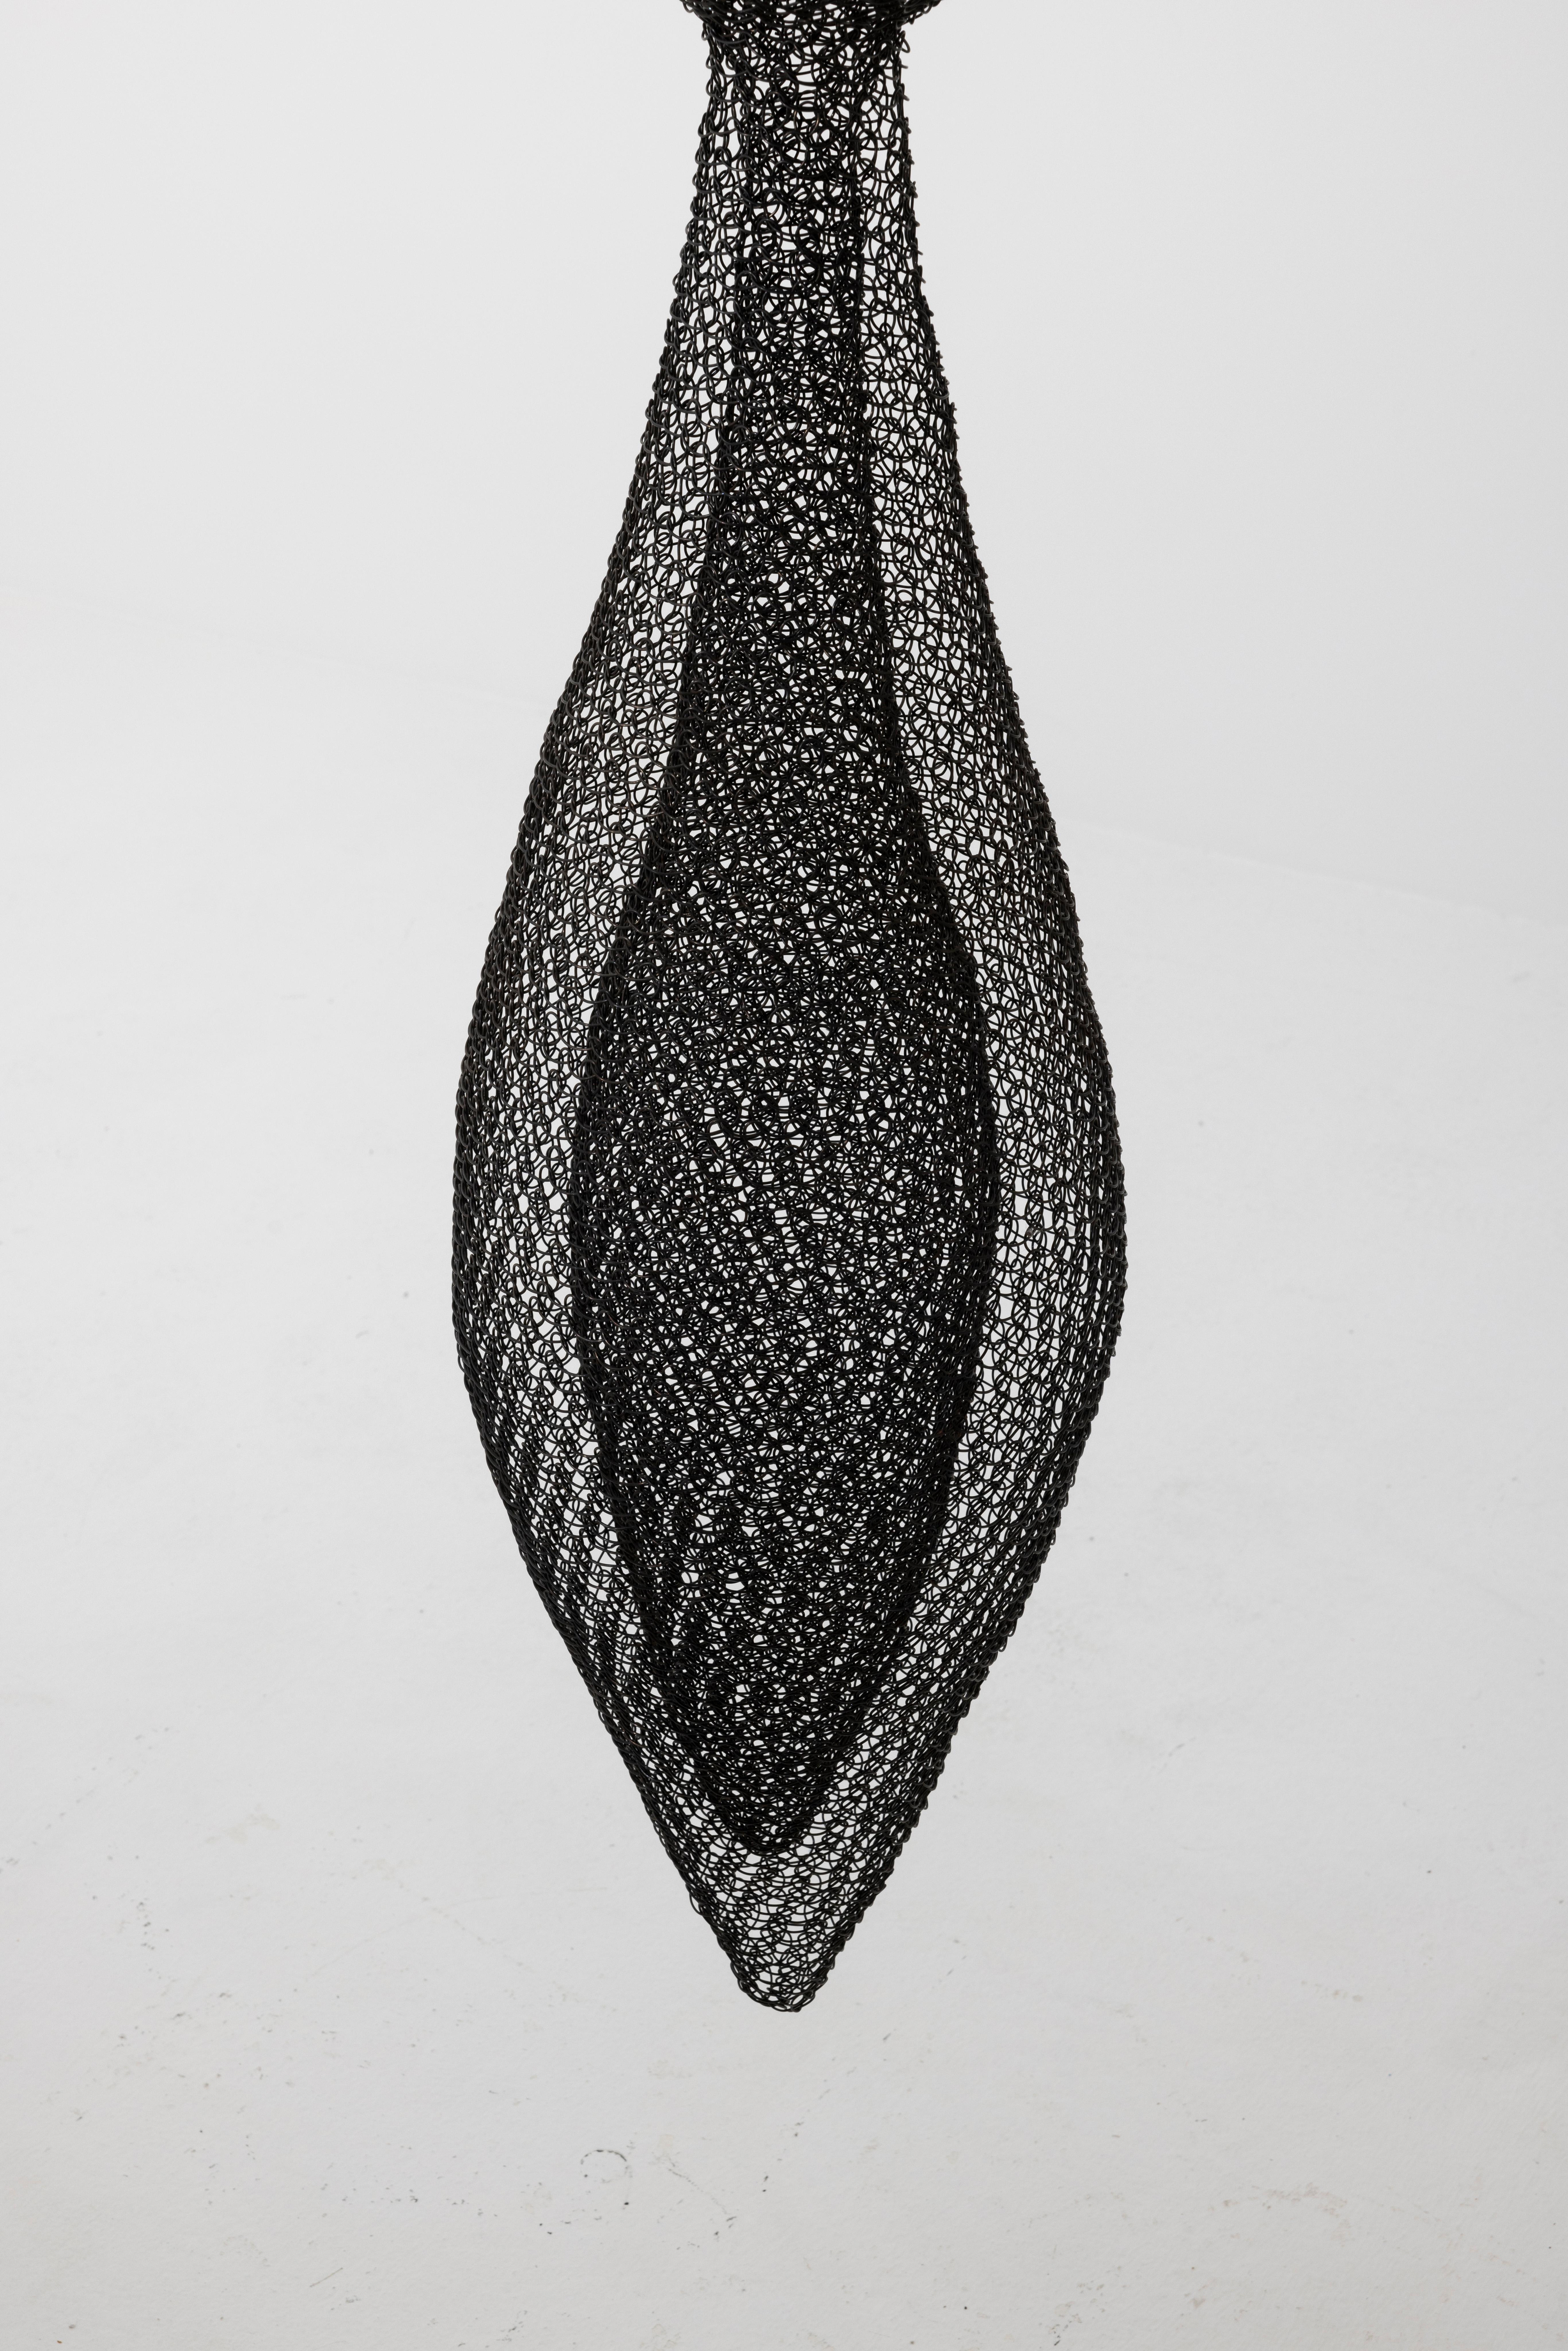 French Contemporary Hanging Hand-Woven Wire Sculpture, France